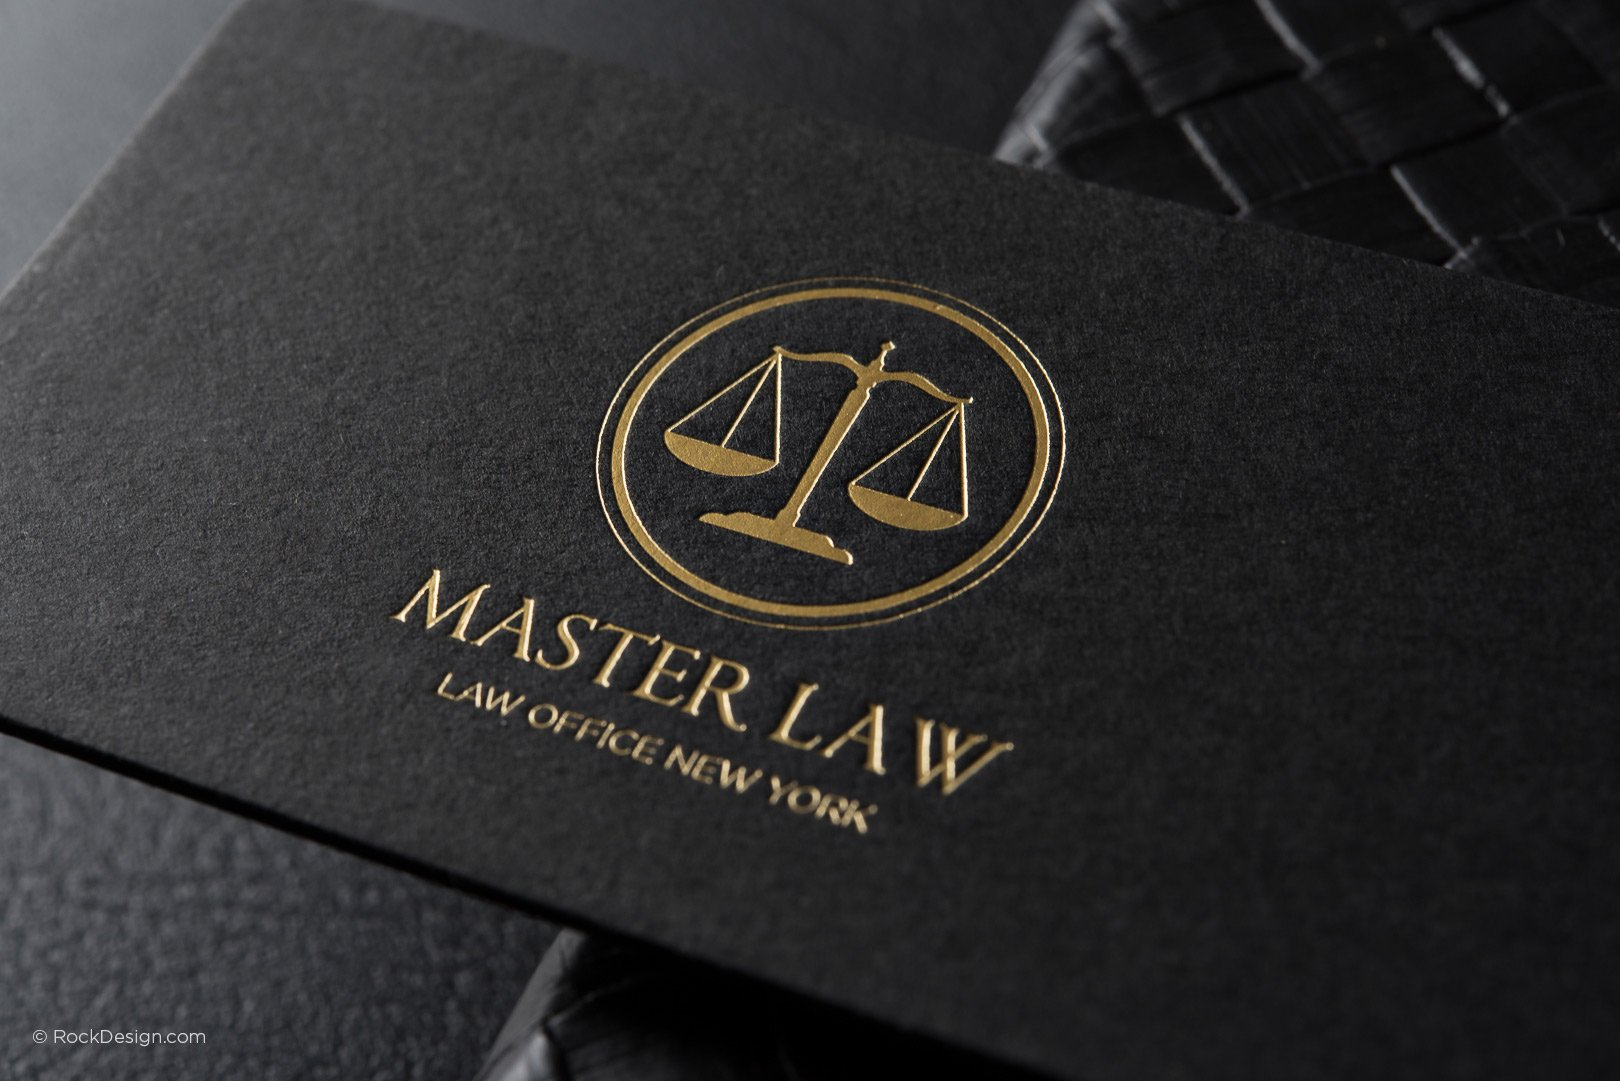 Free Lawyer Business Card Template | Rockdesign With Lawyer Business Cards Templates